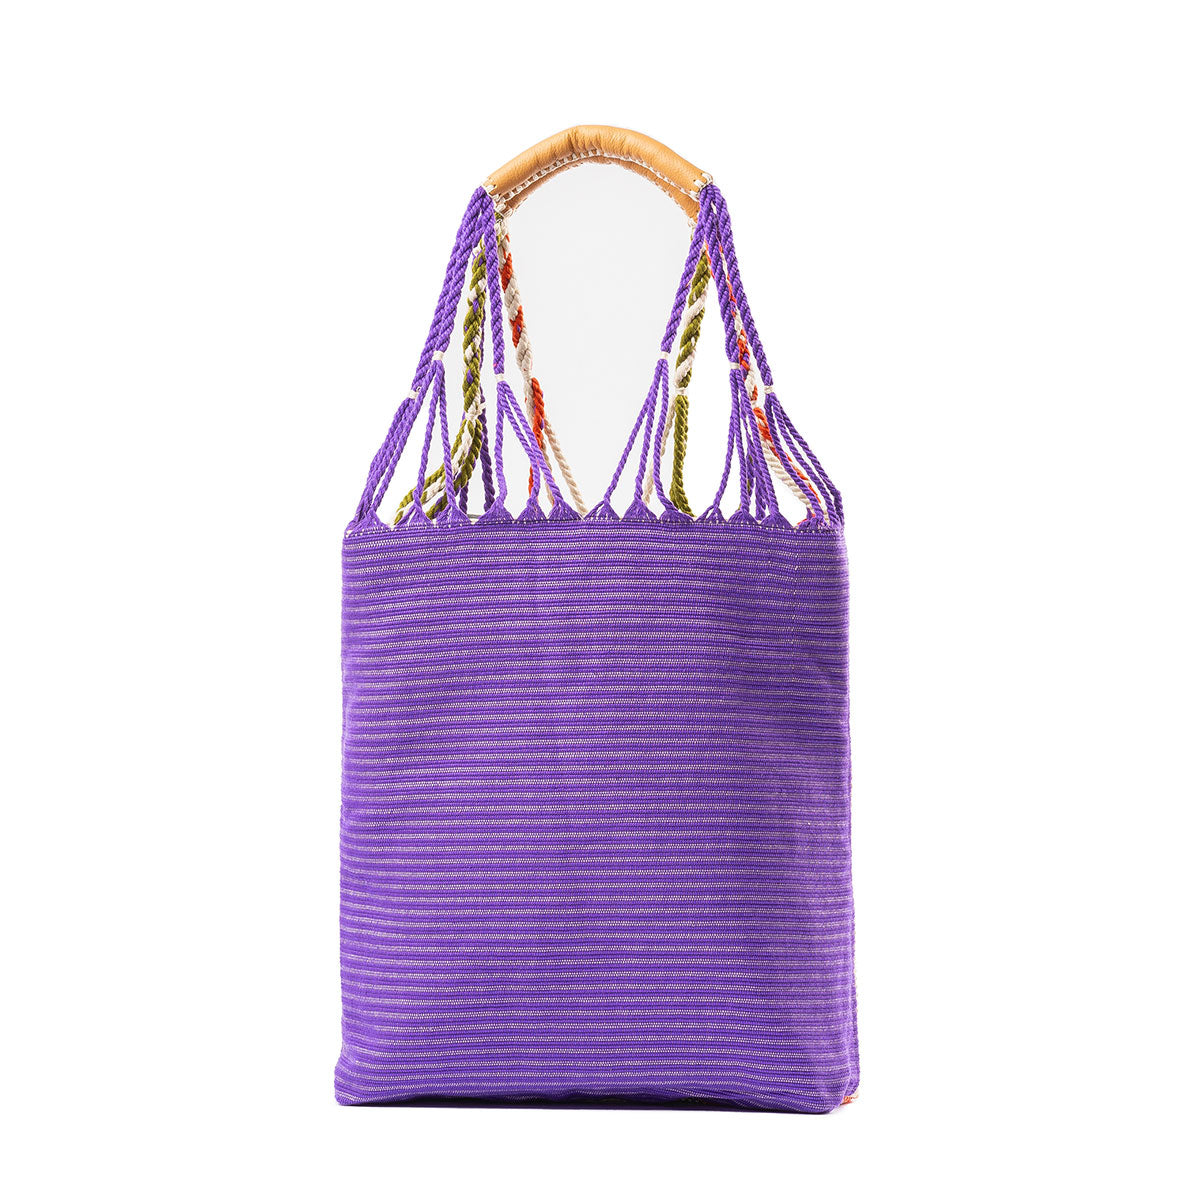 Apolonia Tote Prism Basket Weave. Back of the tote has a purple tones with thin horizontal stripes.